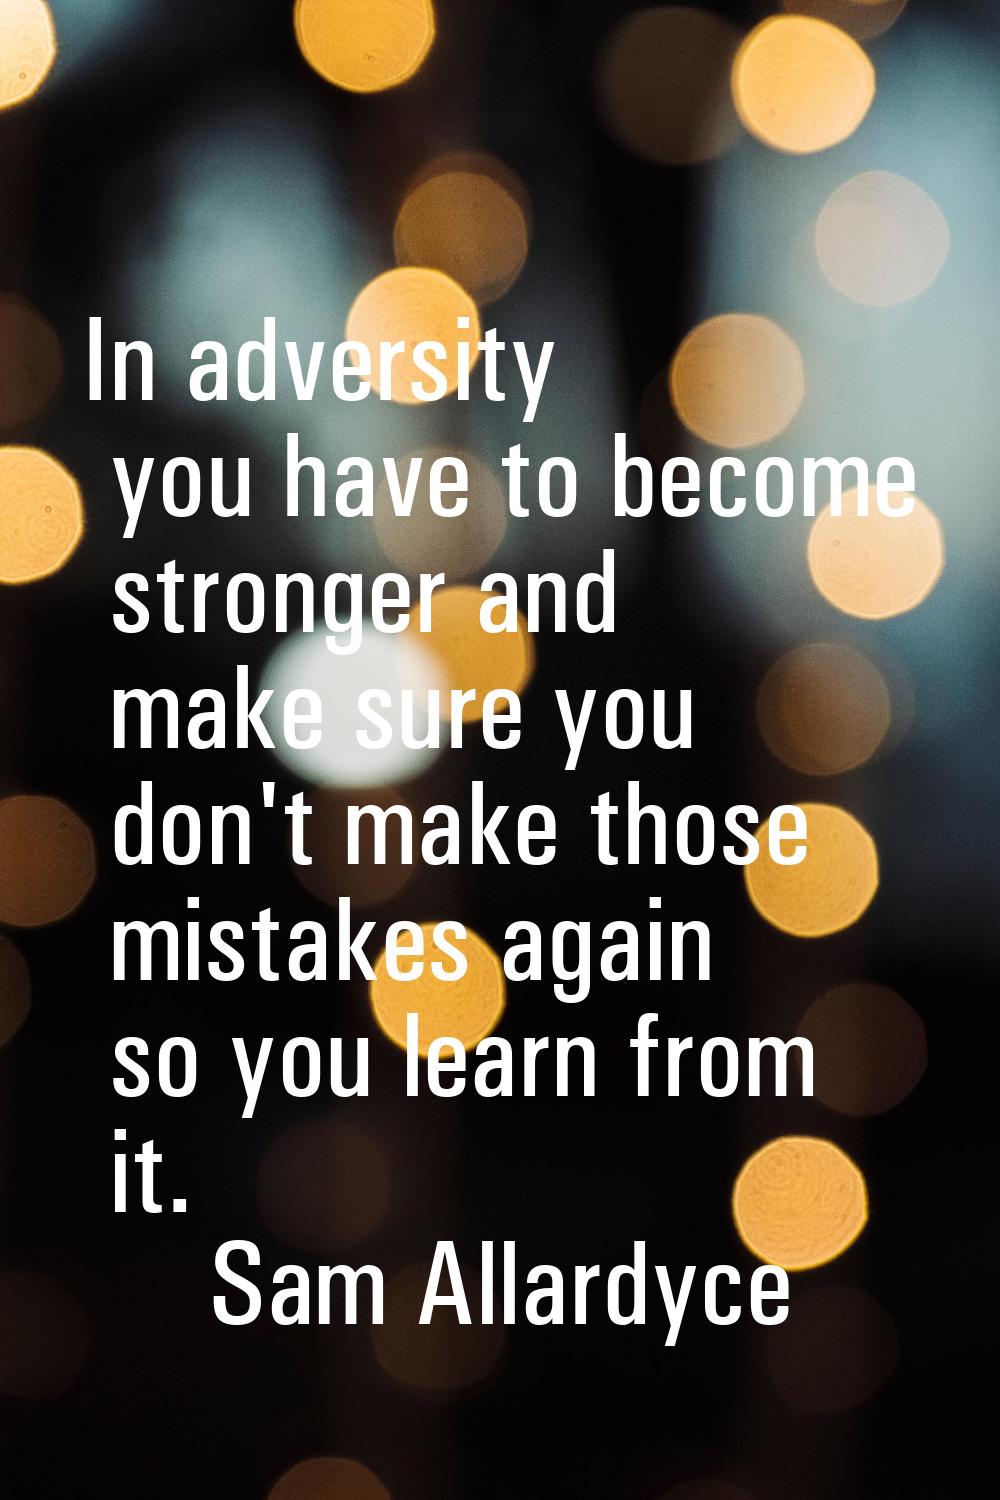 In adversity you have to become stronger and make sure you don't make those mistakes again so you l